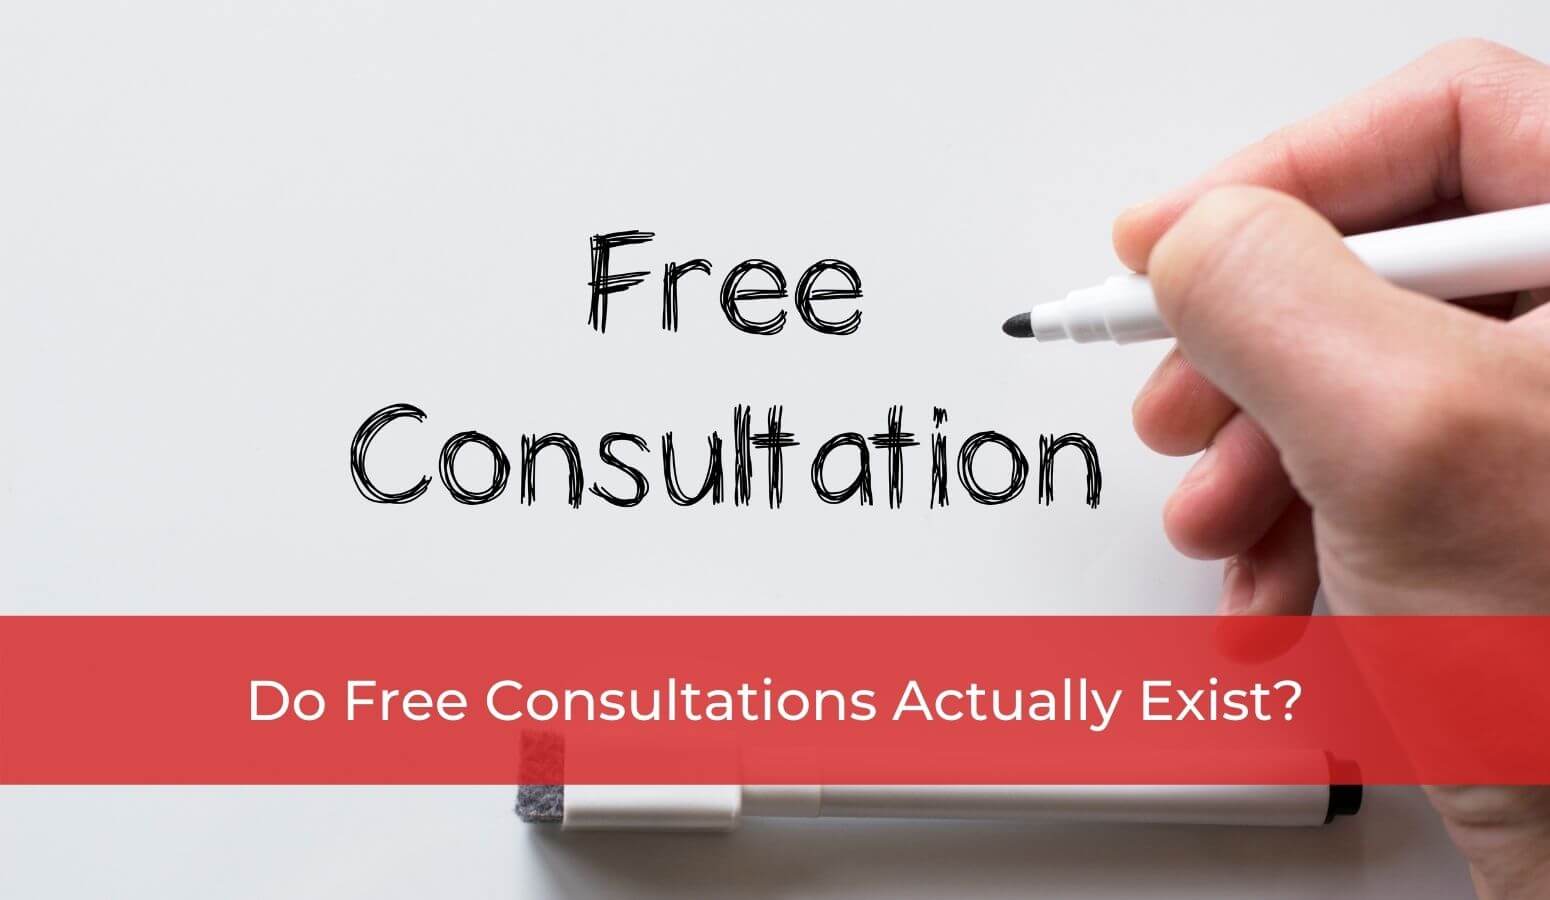 No such thing as free consultations